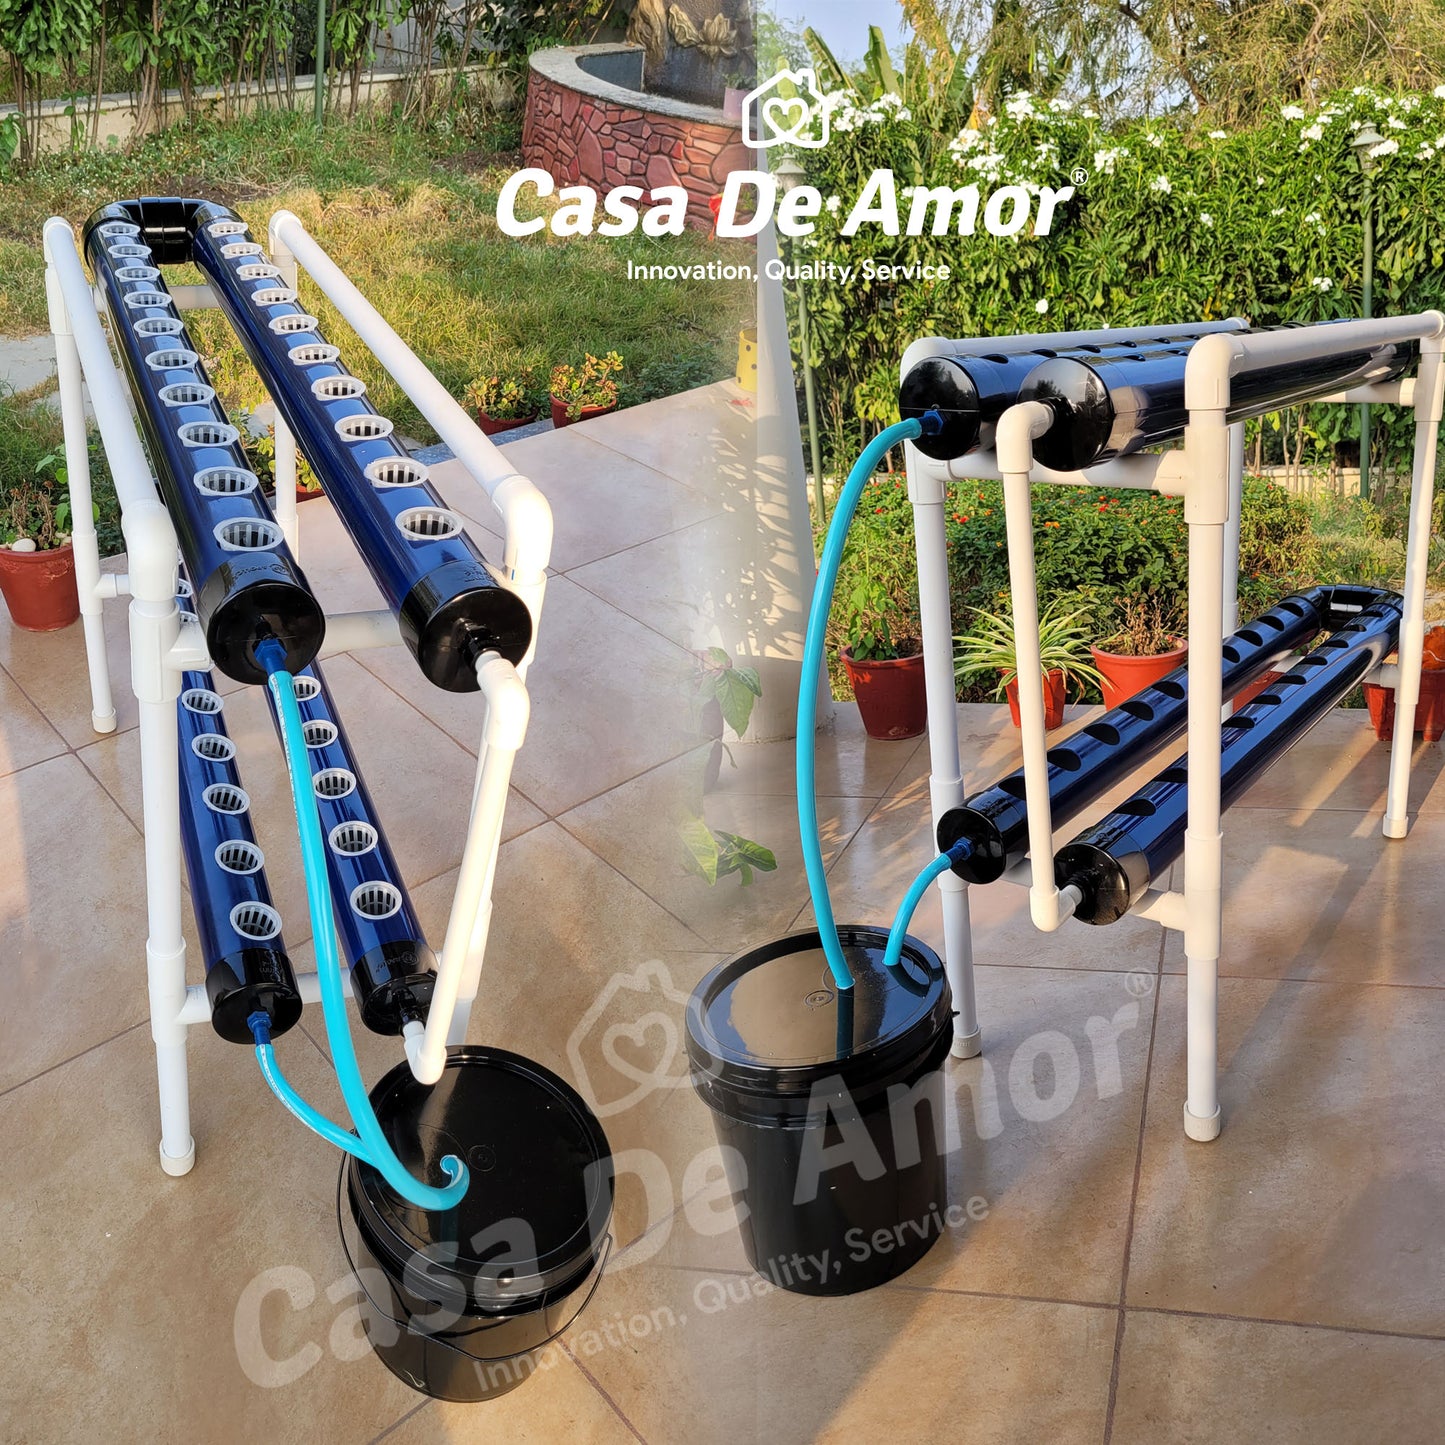 Casa De Amor Hydroponics Kit for Home- 40 Plants, Hydroponic System- Reusable for Indoor/Outdoor